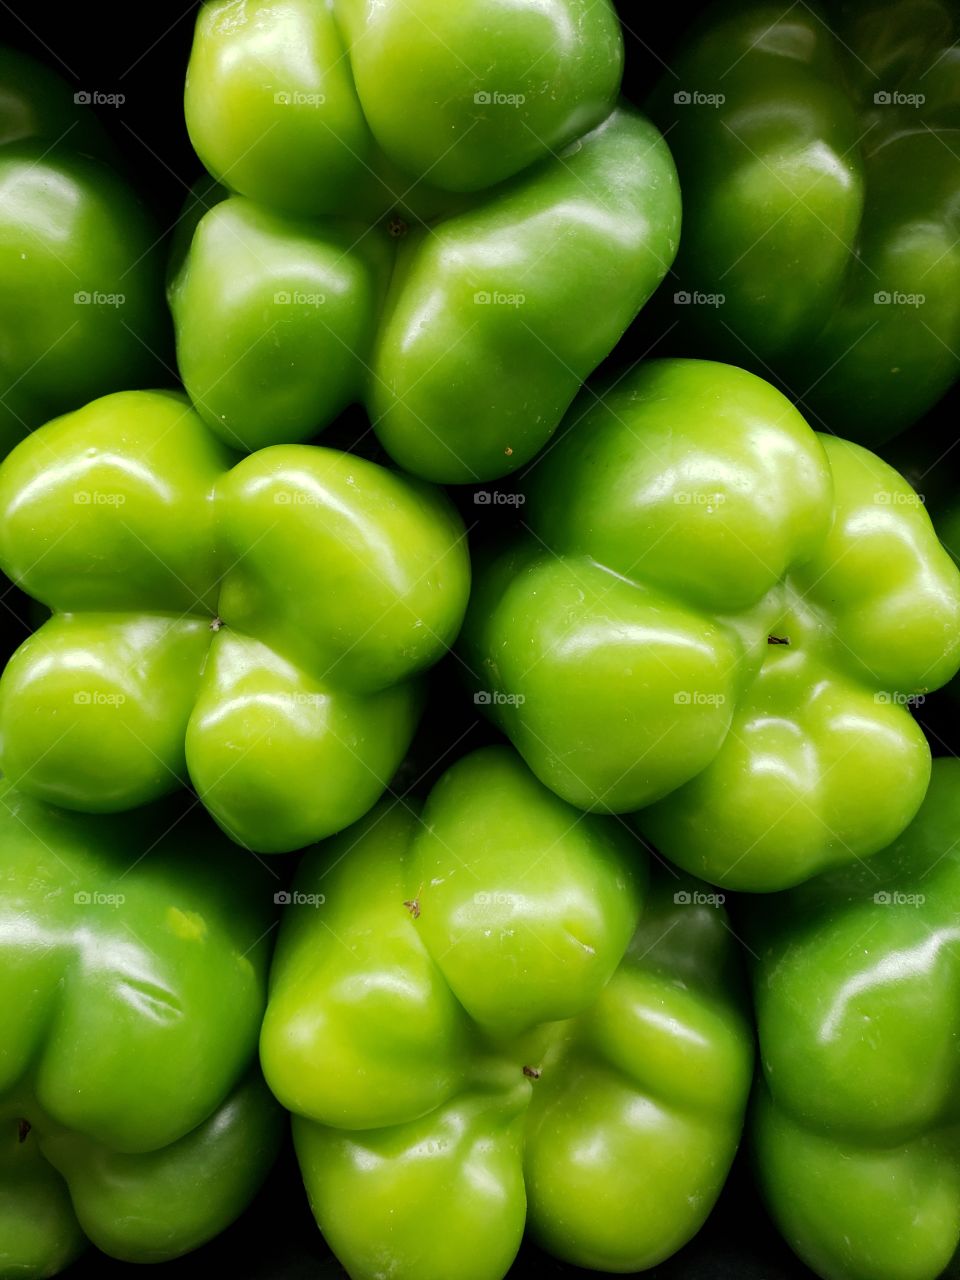 The smooth texture of a pile of green bell peppers